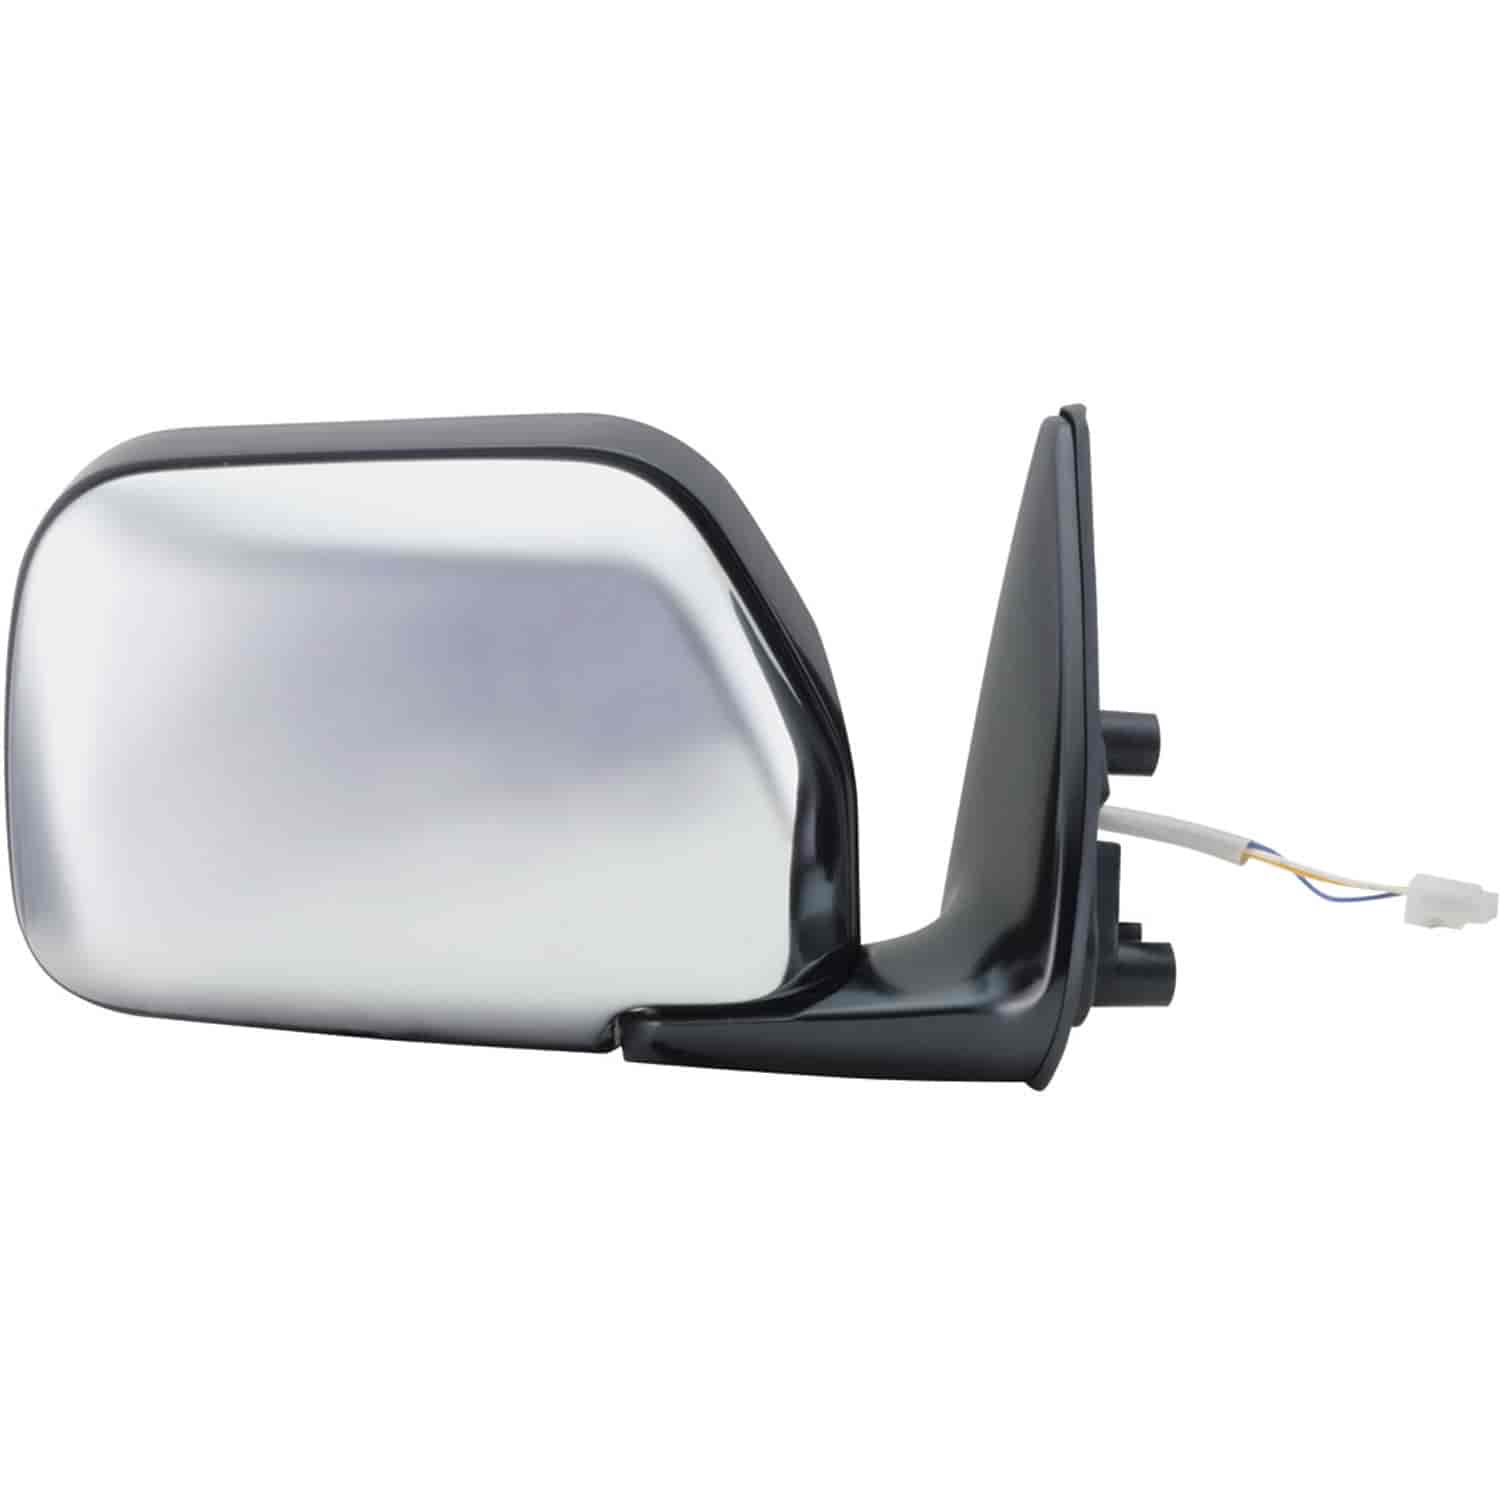 OEM Style Replacement mirror for 93-98 Toyota T-100 Pick-Up passenger side mirror tested to fit and